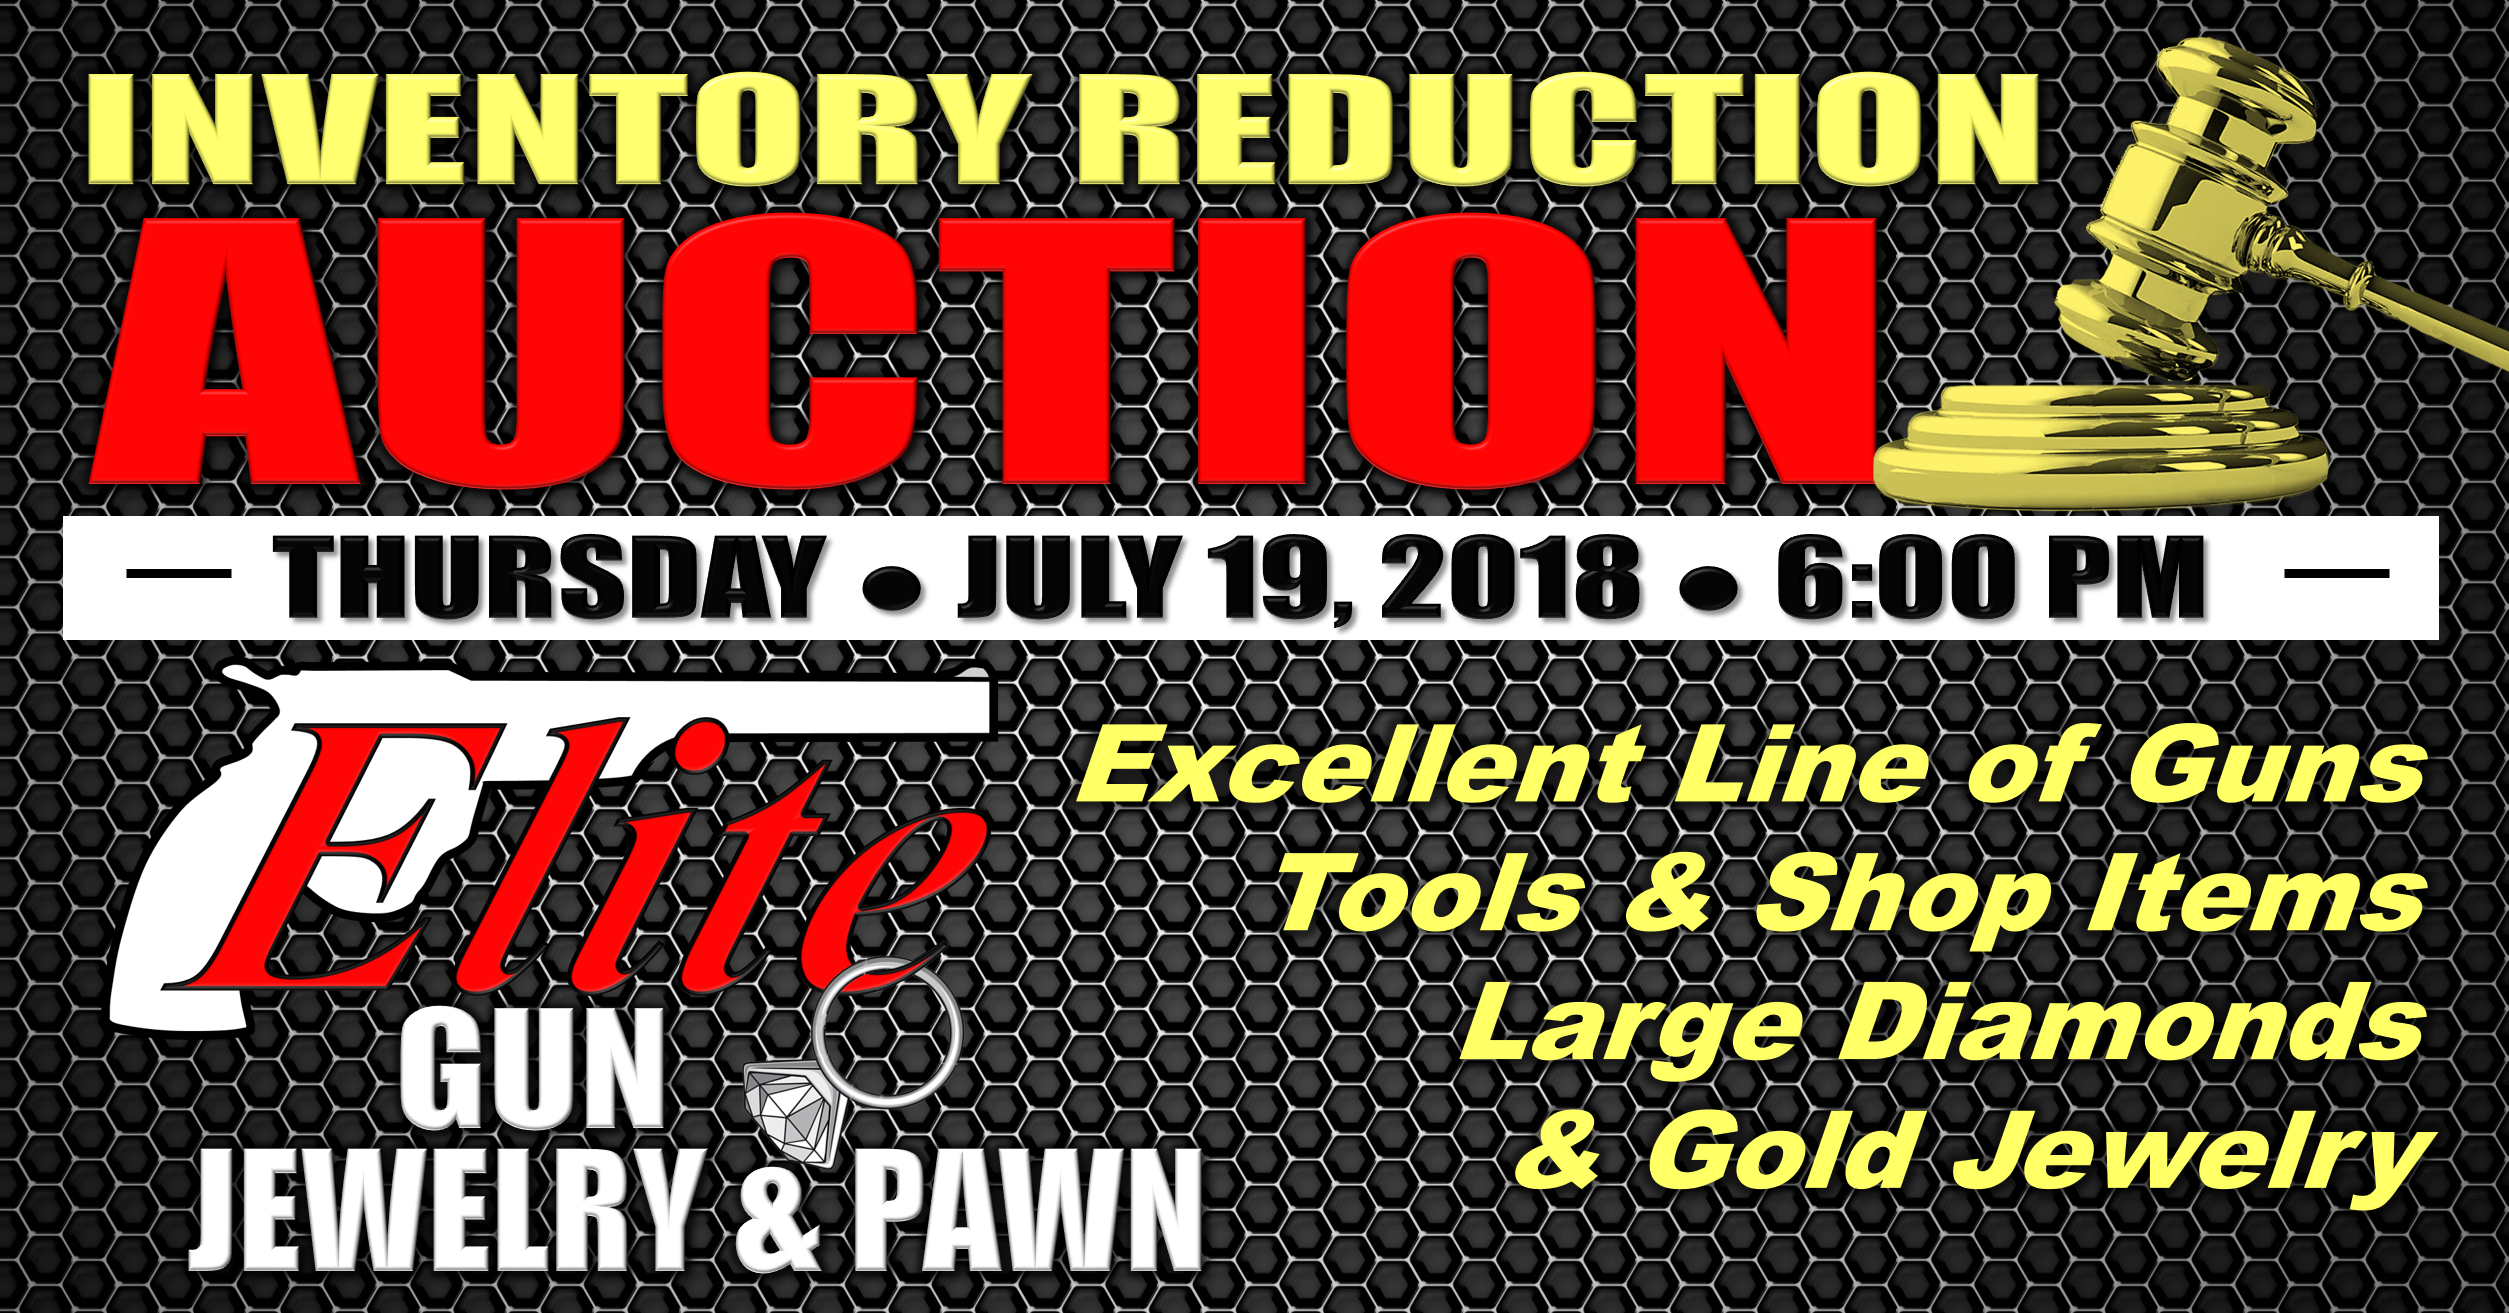 INVENTORY REDUCTION AUCTION